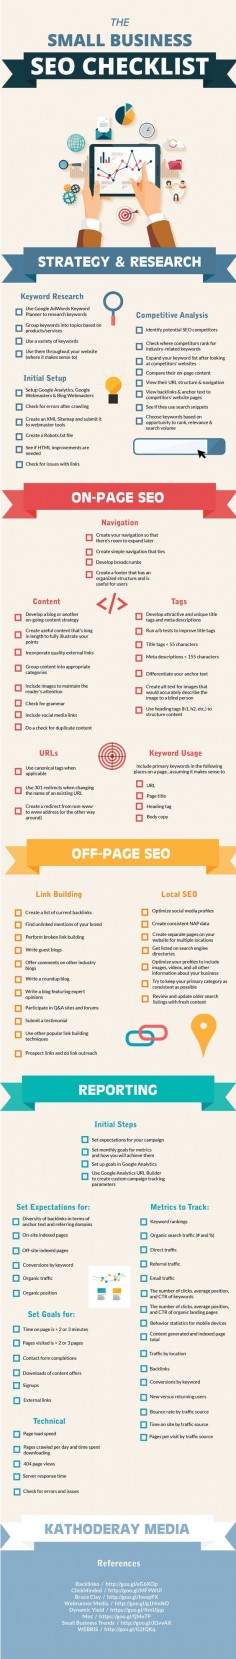 Looking for a way to improve your small business's SEO? Use our SEO checklist to get information on research, local SEO, on-page SEO, off-page SEO, and more!